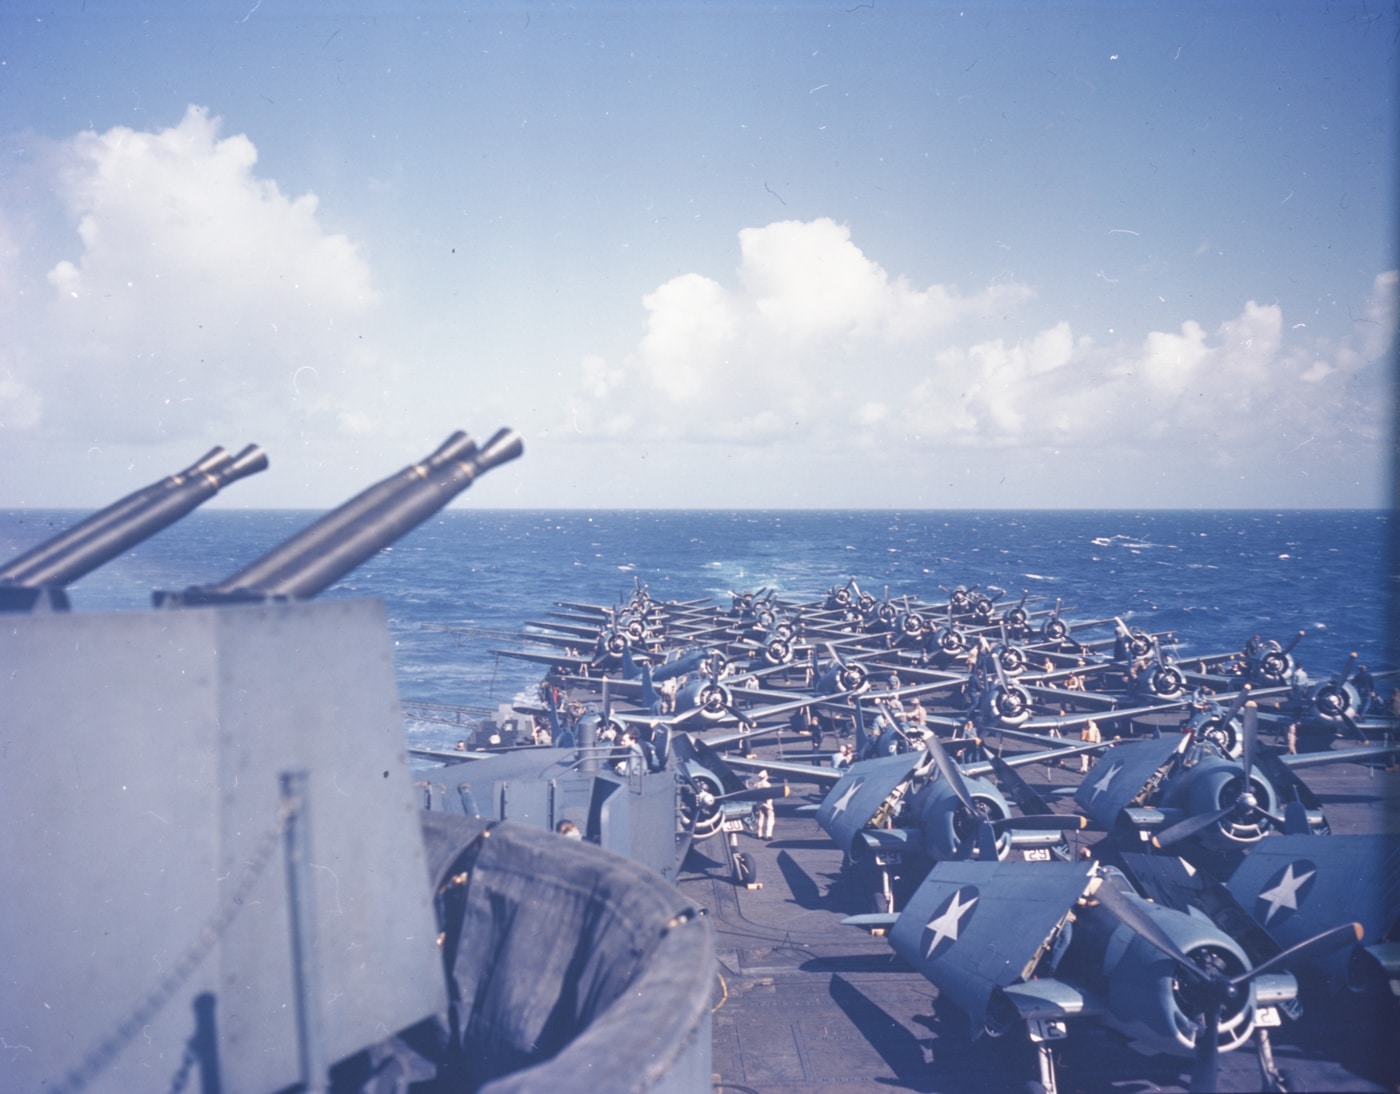 f6f-3 hellcats and sbd-4 dauntless dive bombers on desck of uss essex